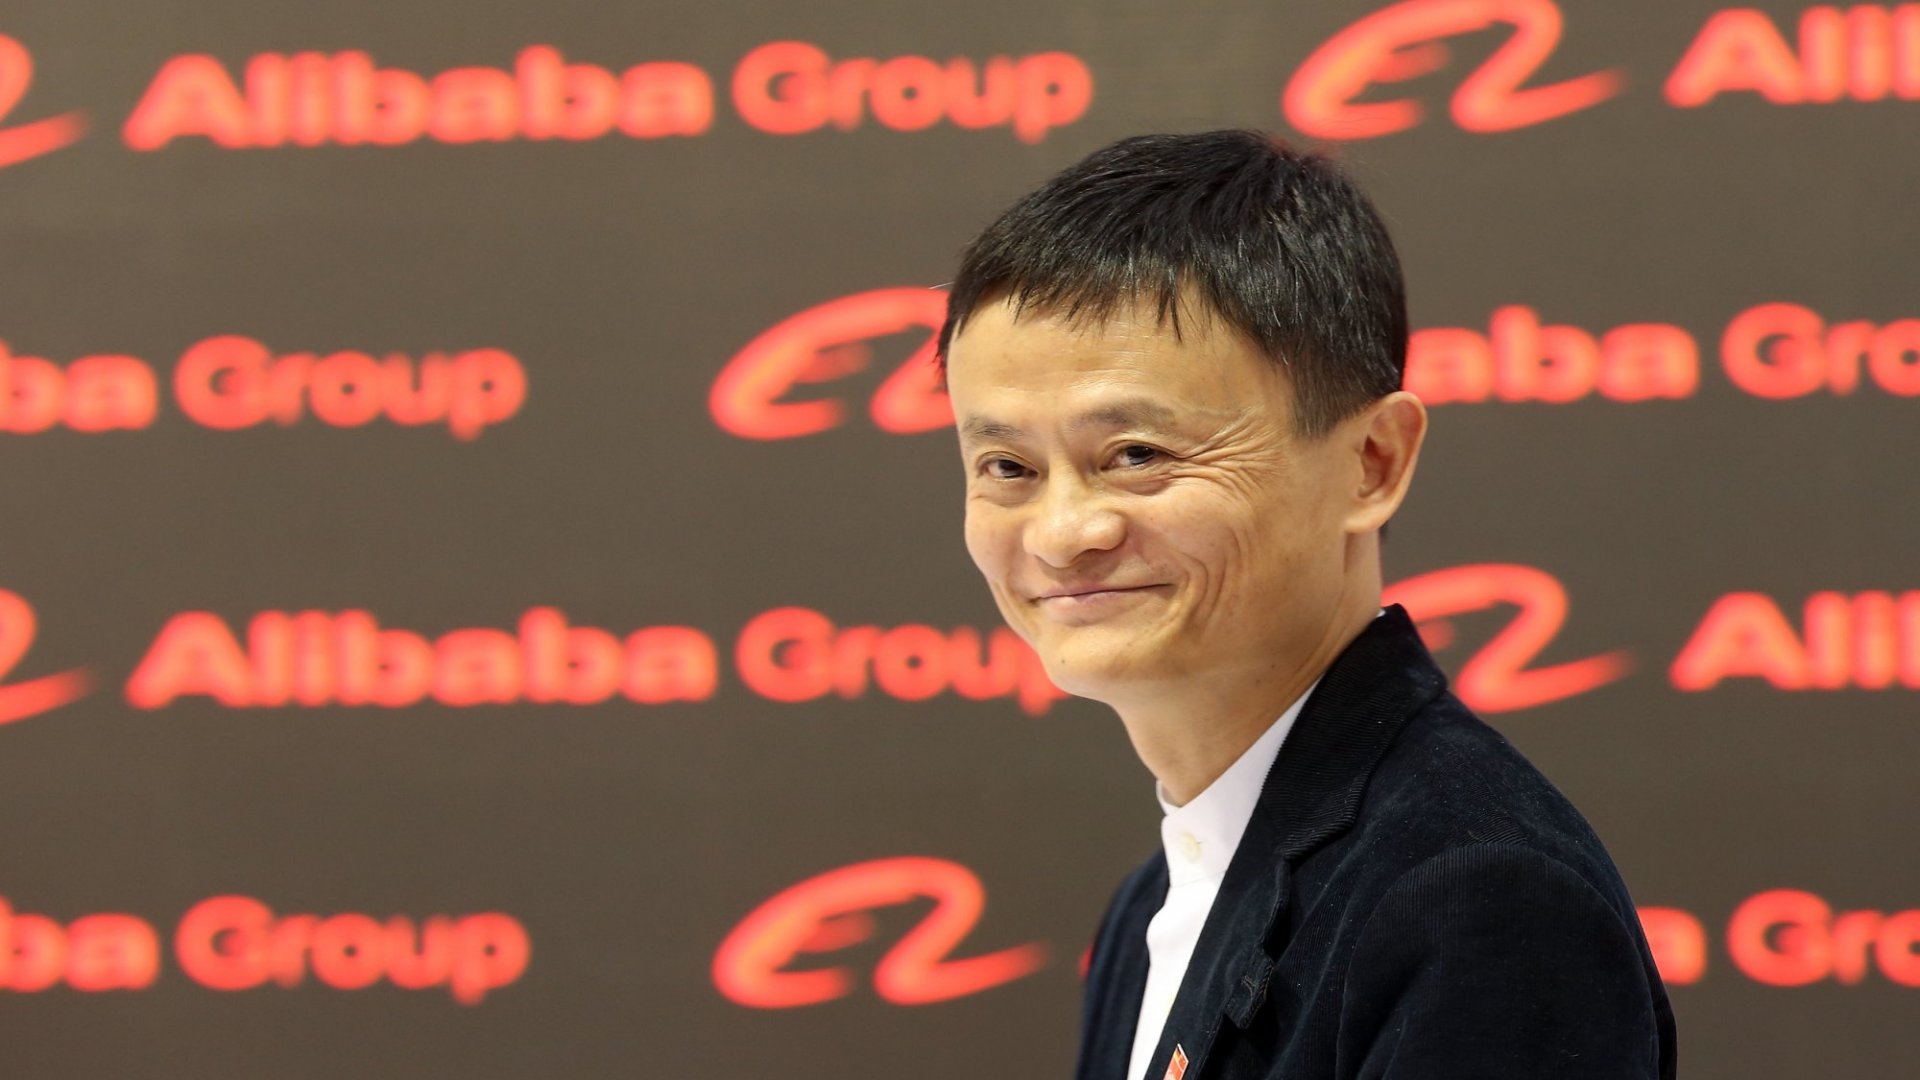 Jack Ma and Alibaba: A Story of Trust